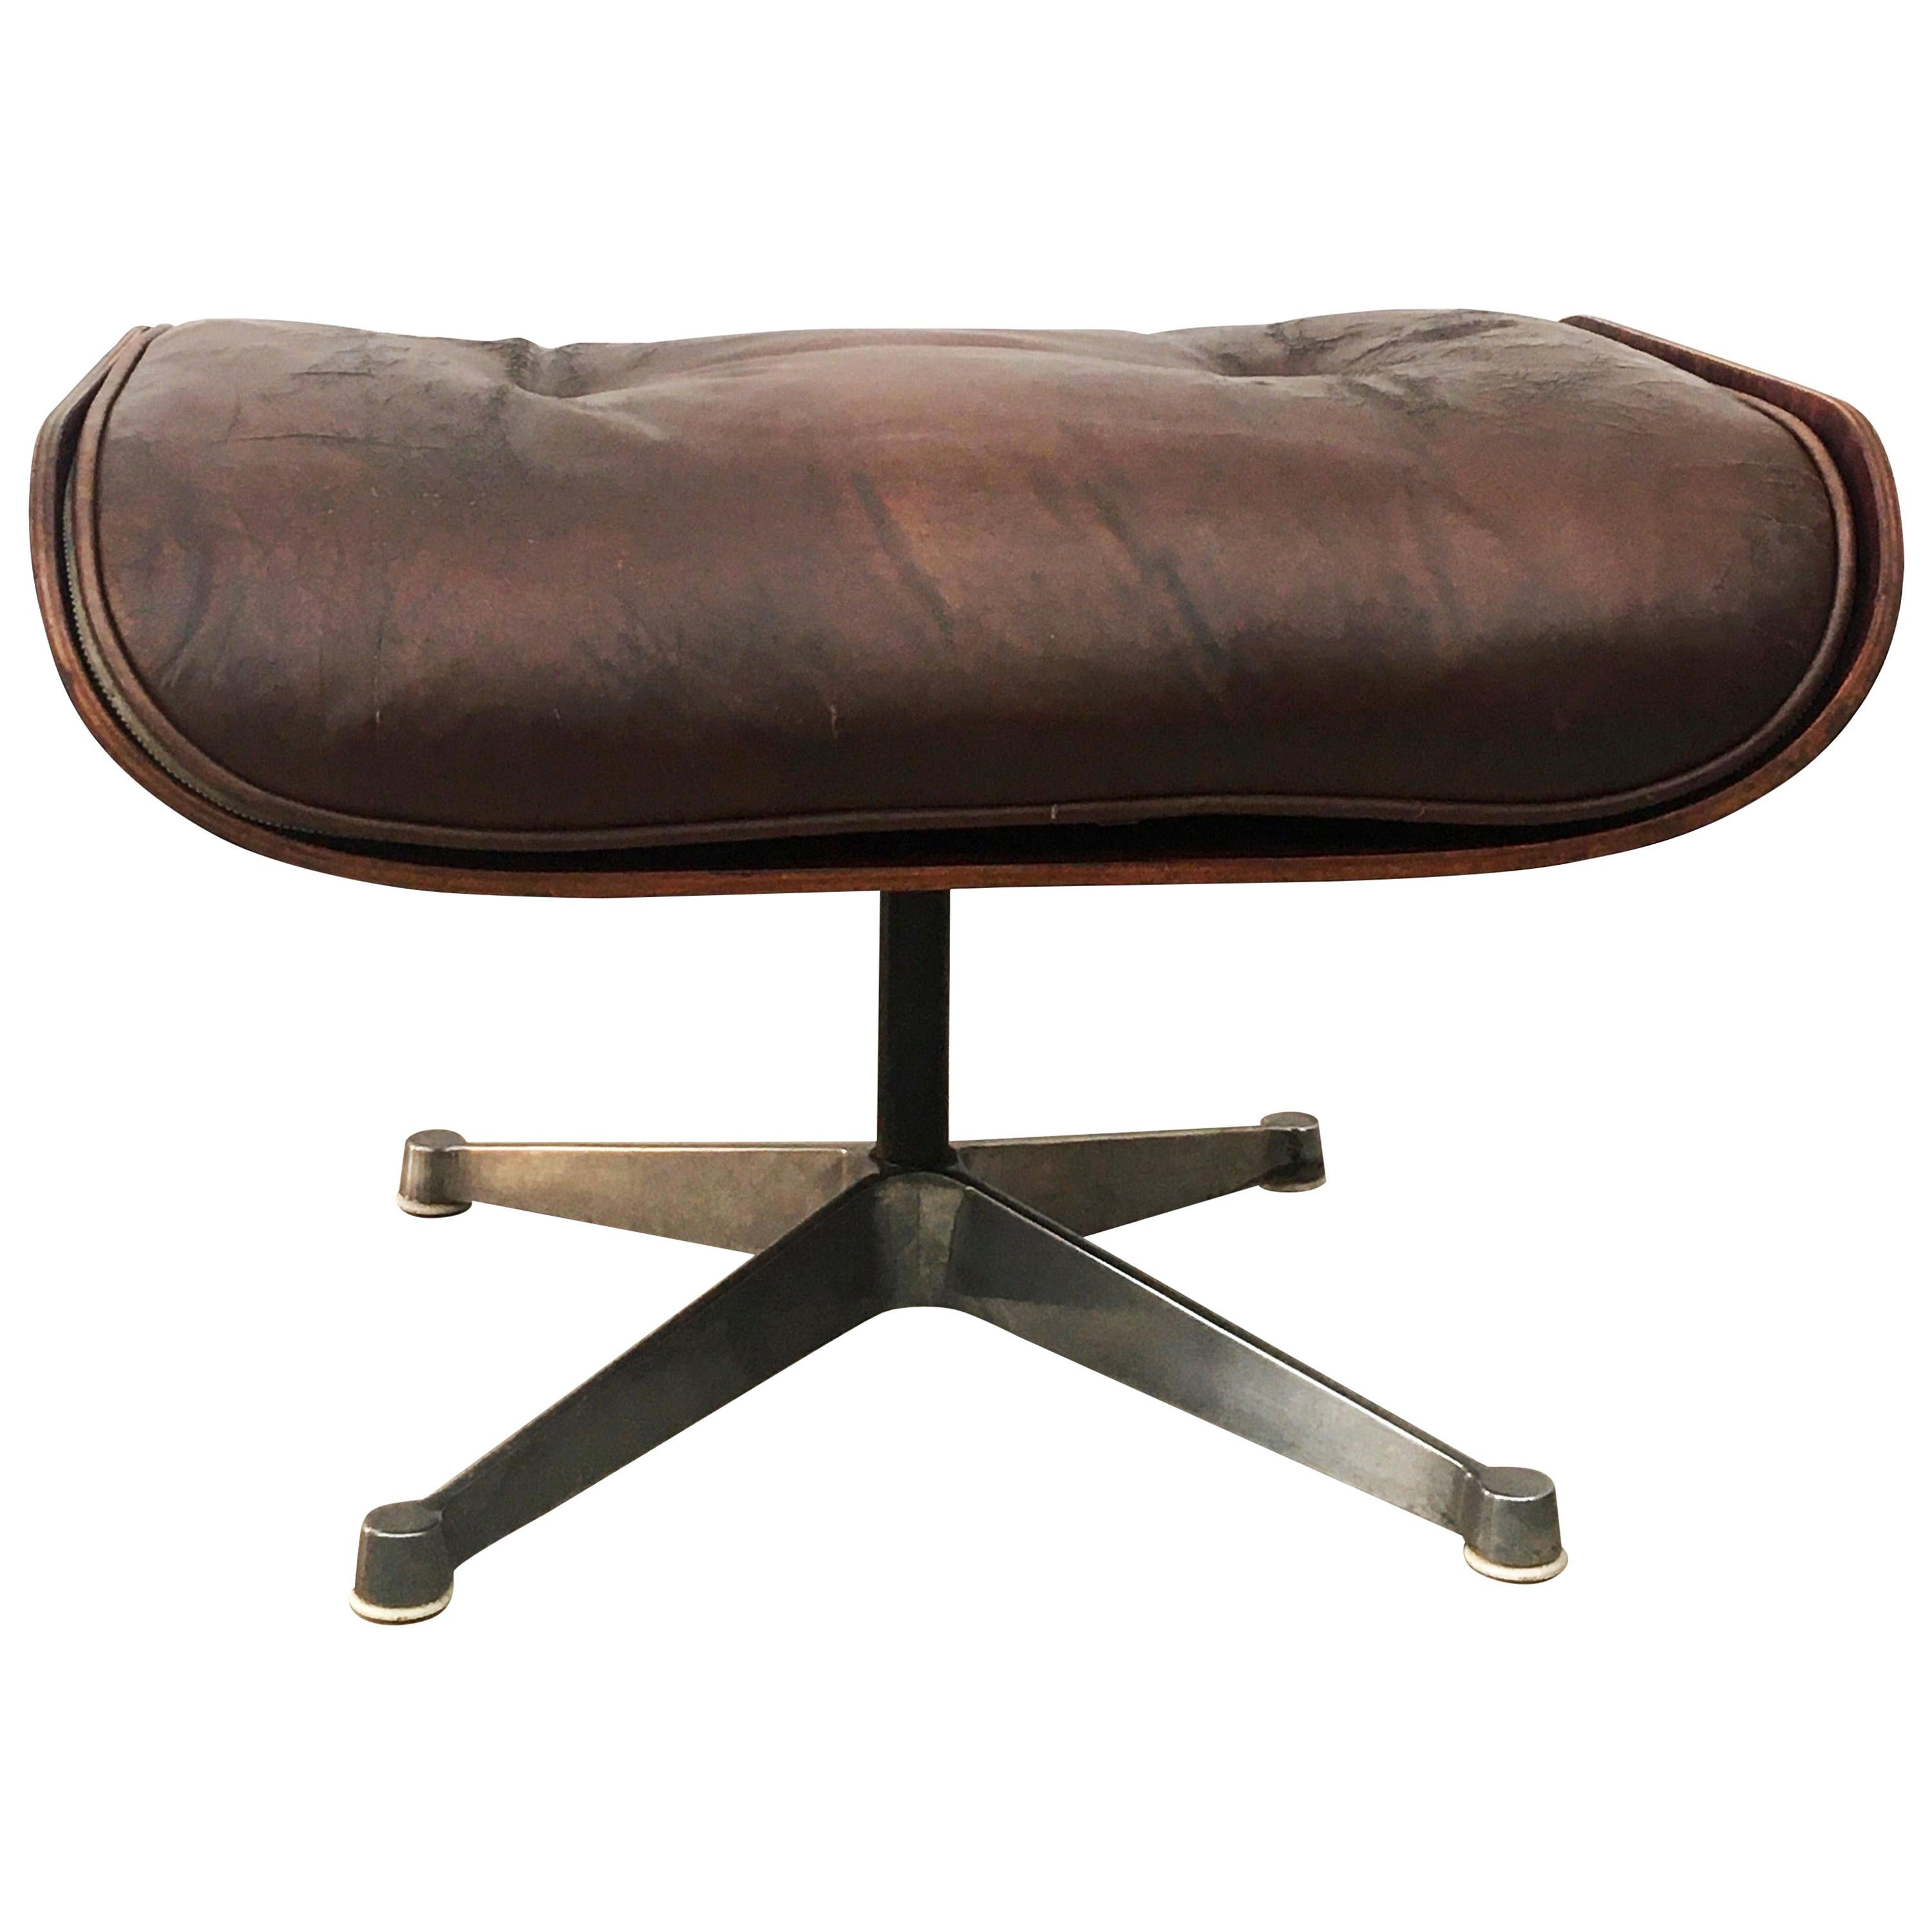 Charles Eames for Herman Miller Style Leather Ottoman